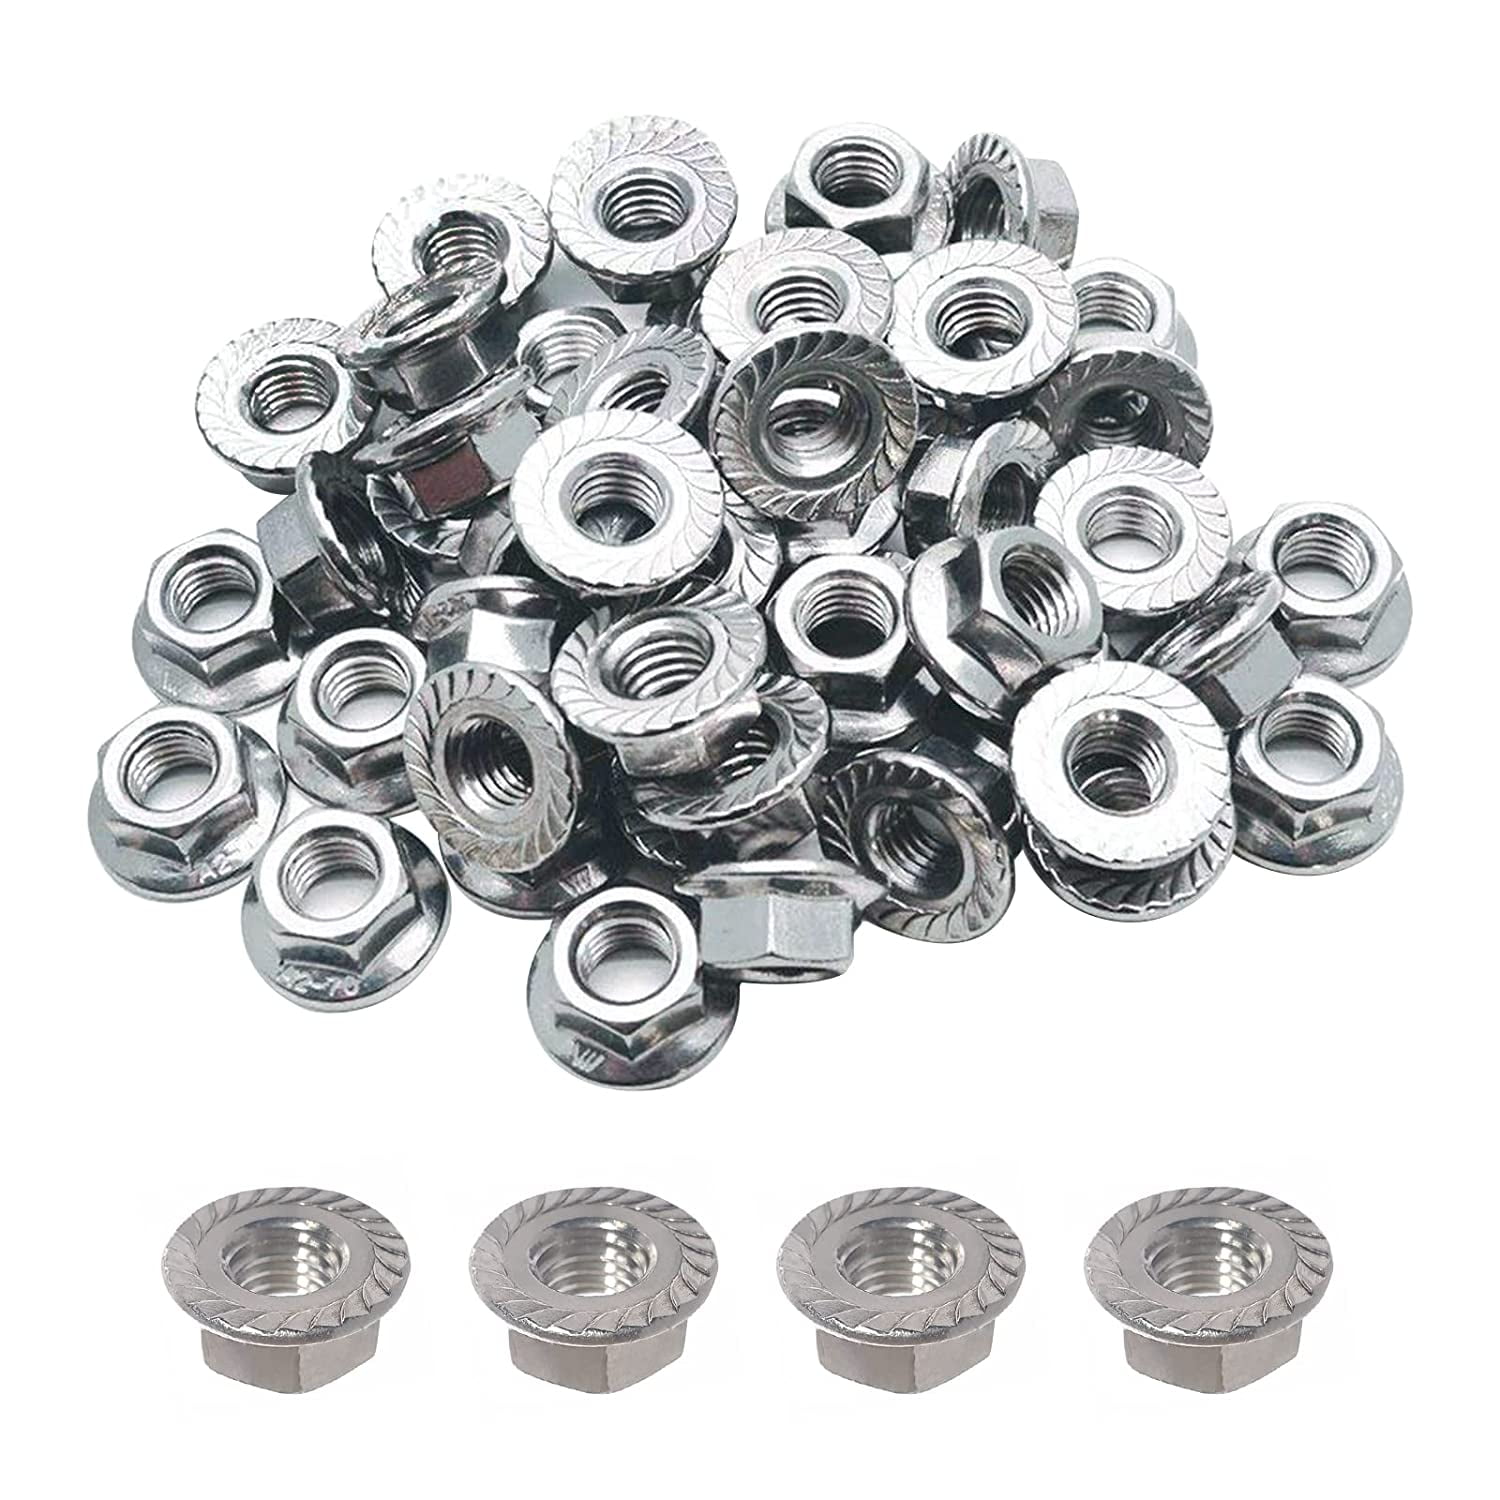 50 Pcs M6 Flange Nuts Hexagon Metric Thread Durable 304 Stainless Steel 